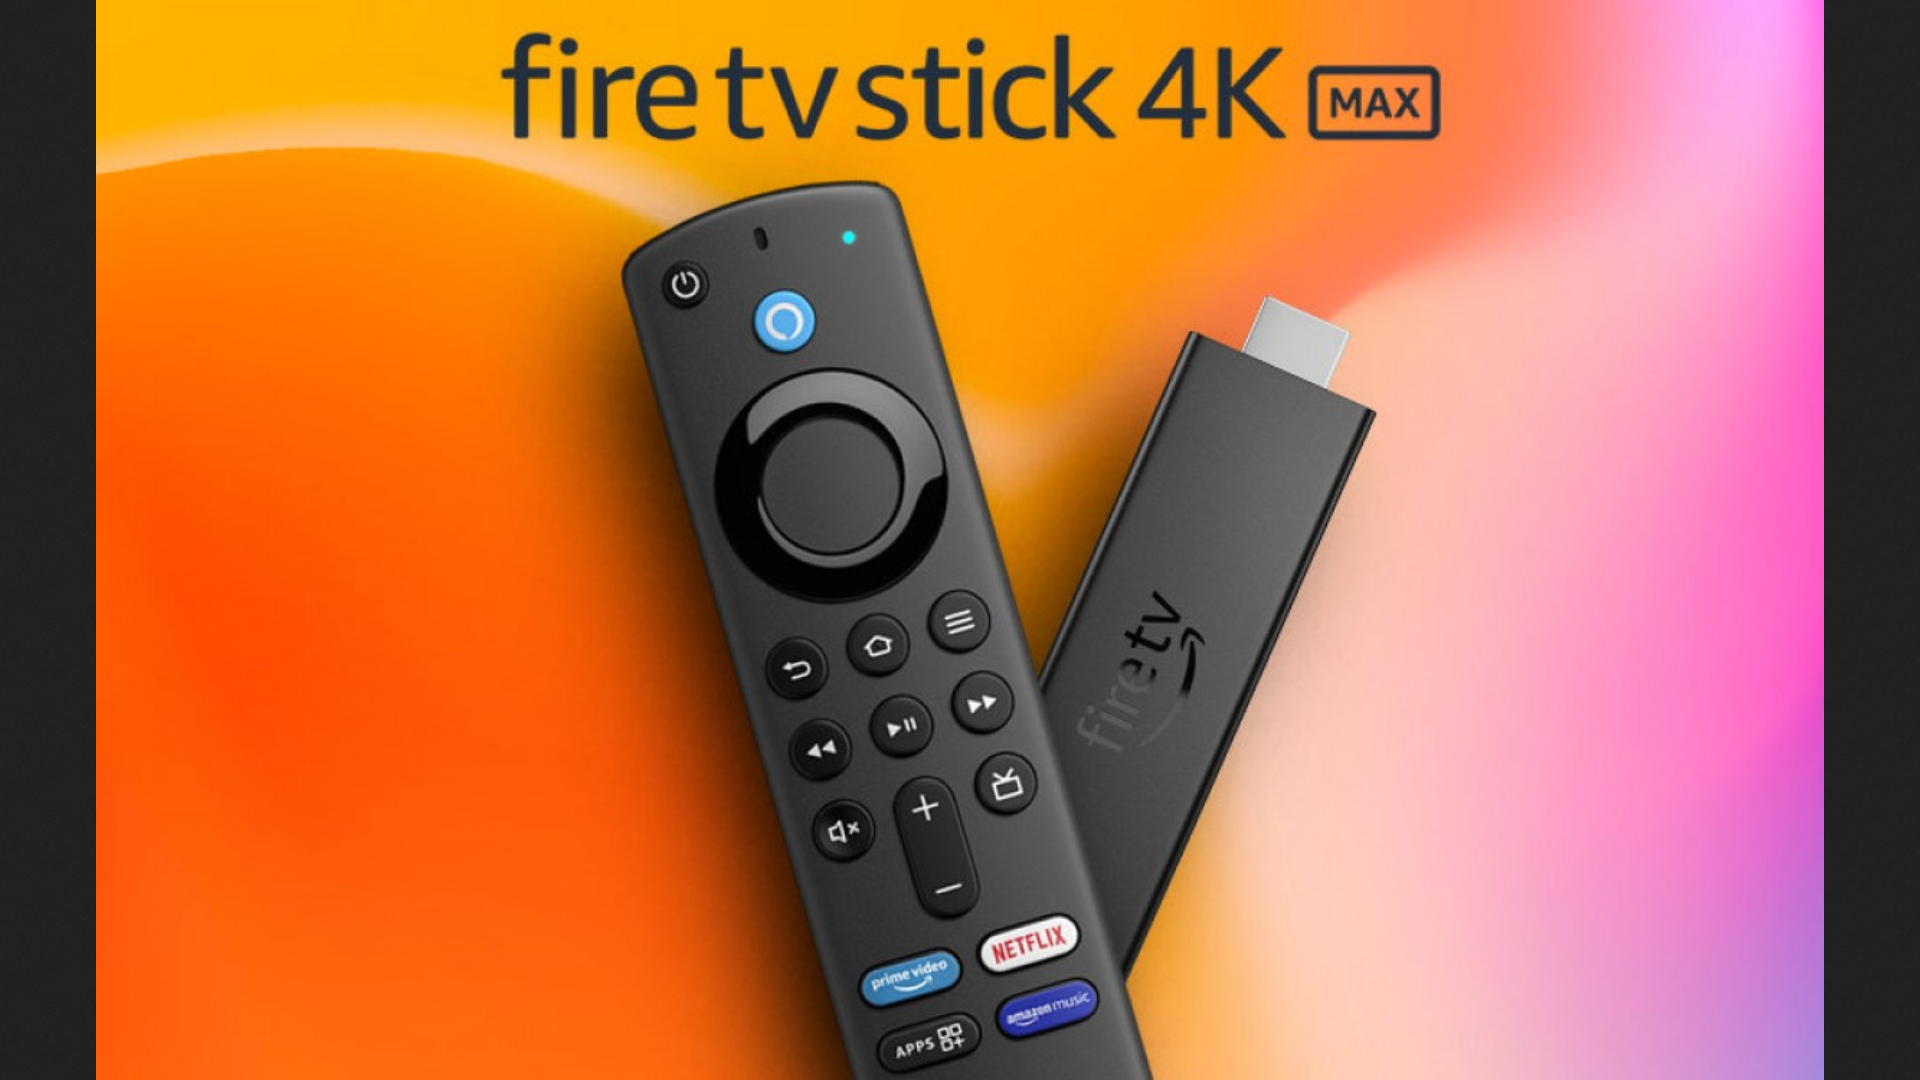 Amazon takes the Fire Stick 4K to the Max with Wi-Fi 6 and 